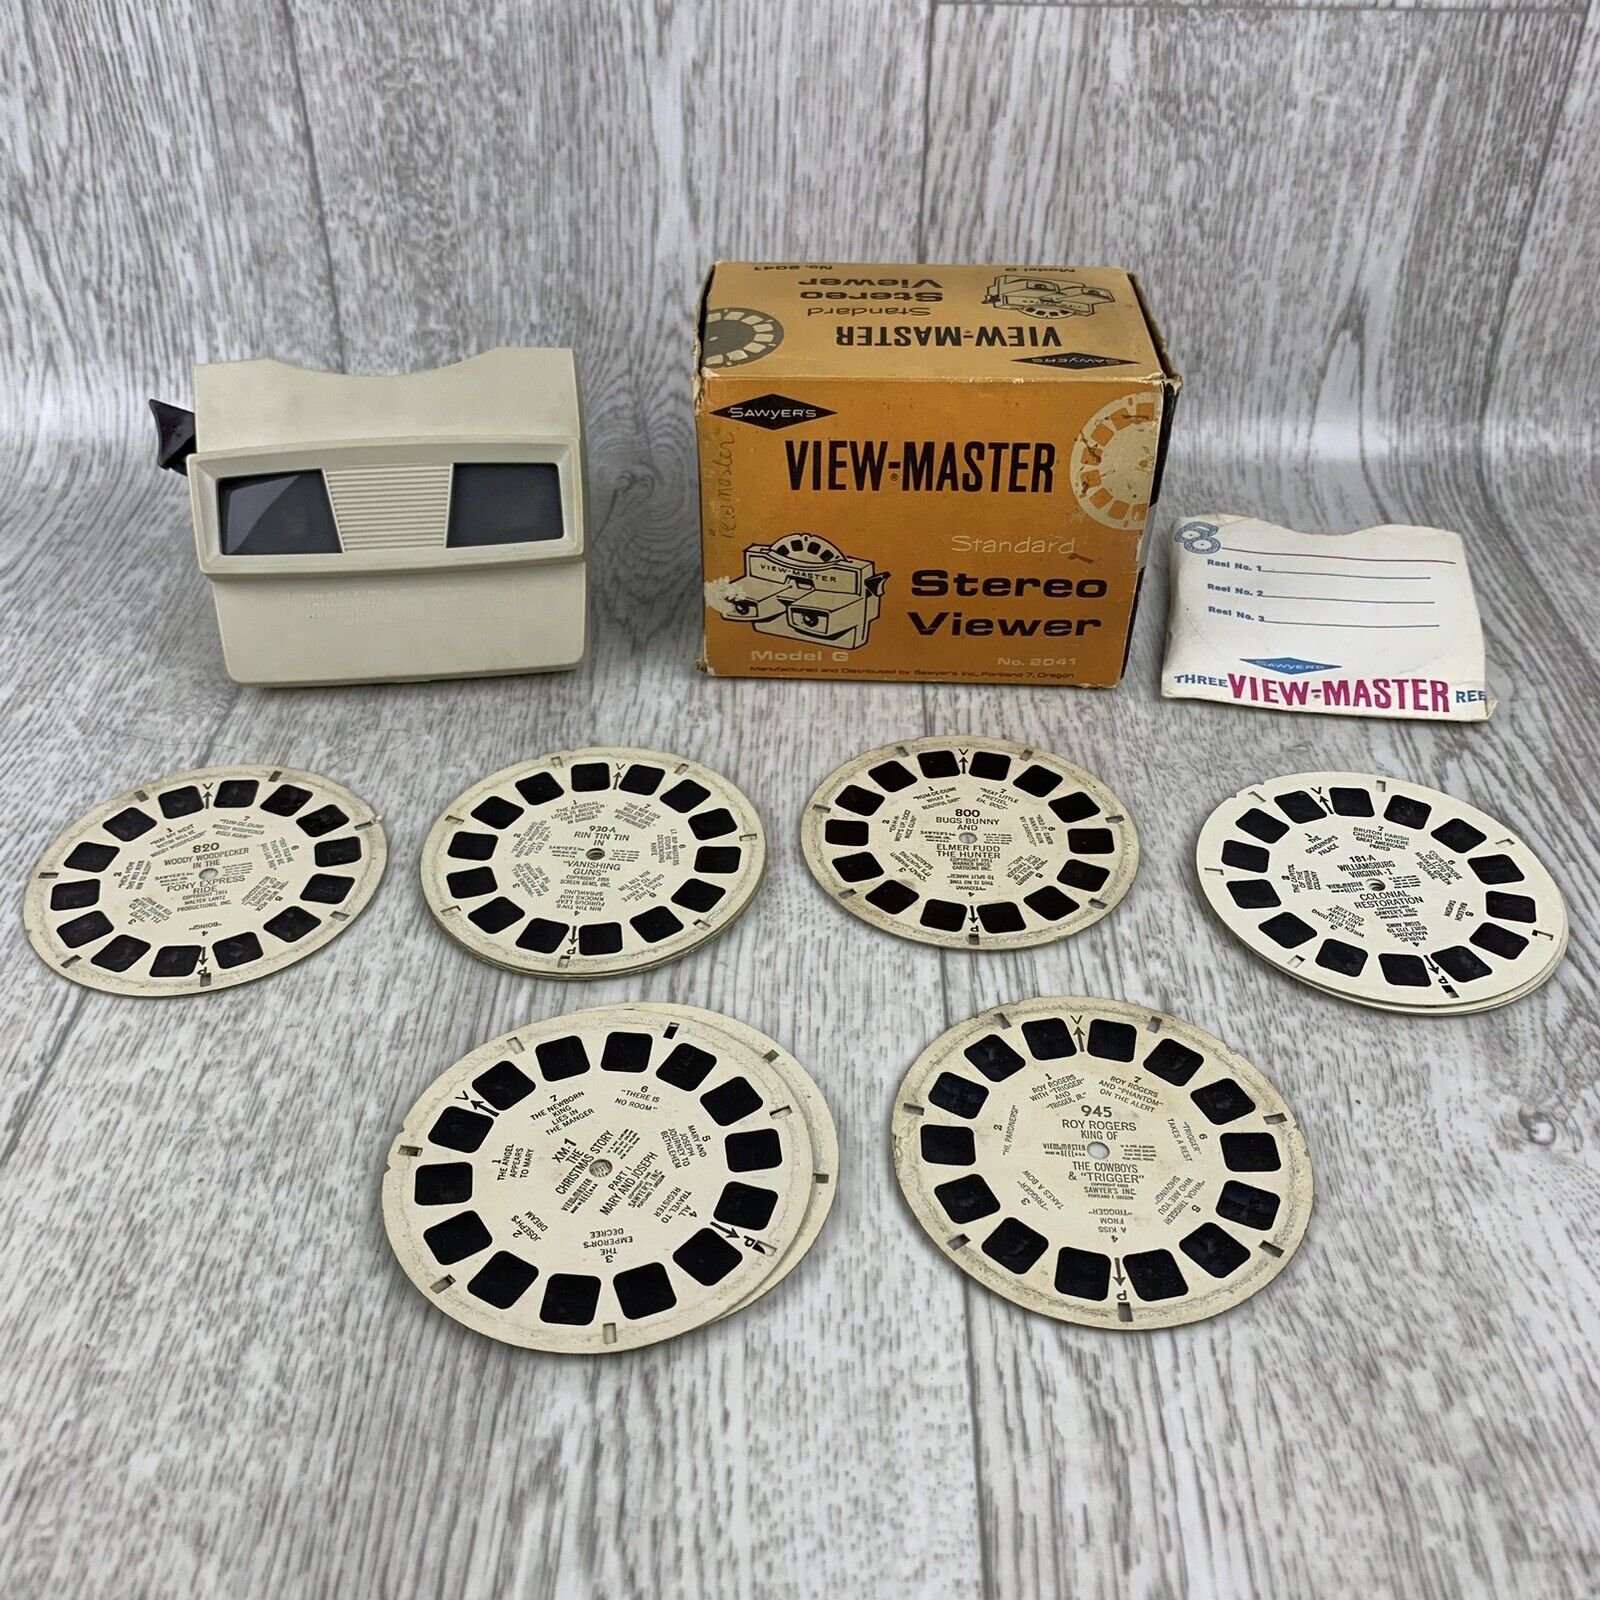 Vintage Sawyer's View-Master Model G Standard Stereo Viewer #2041 -12 Disc 1940